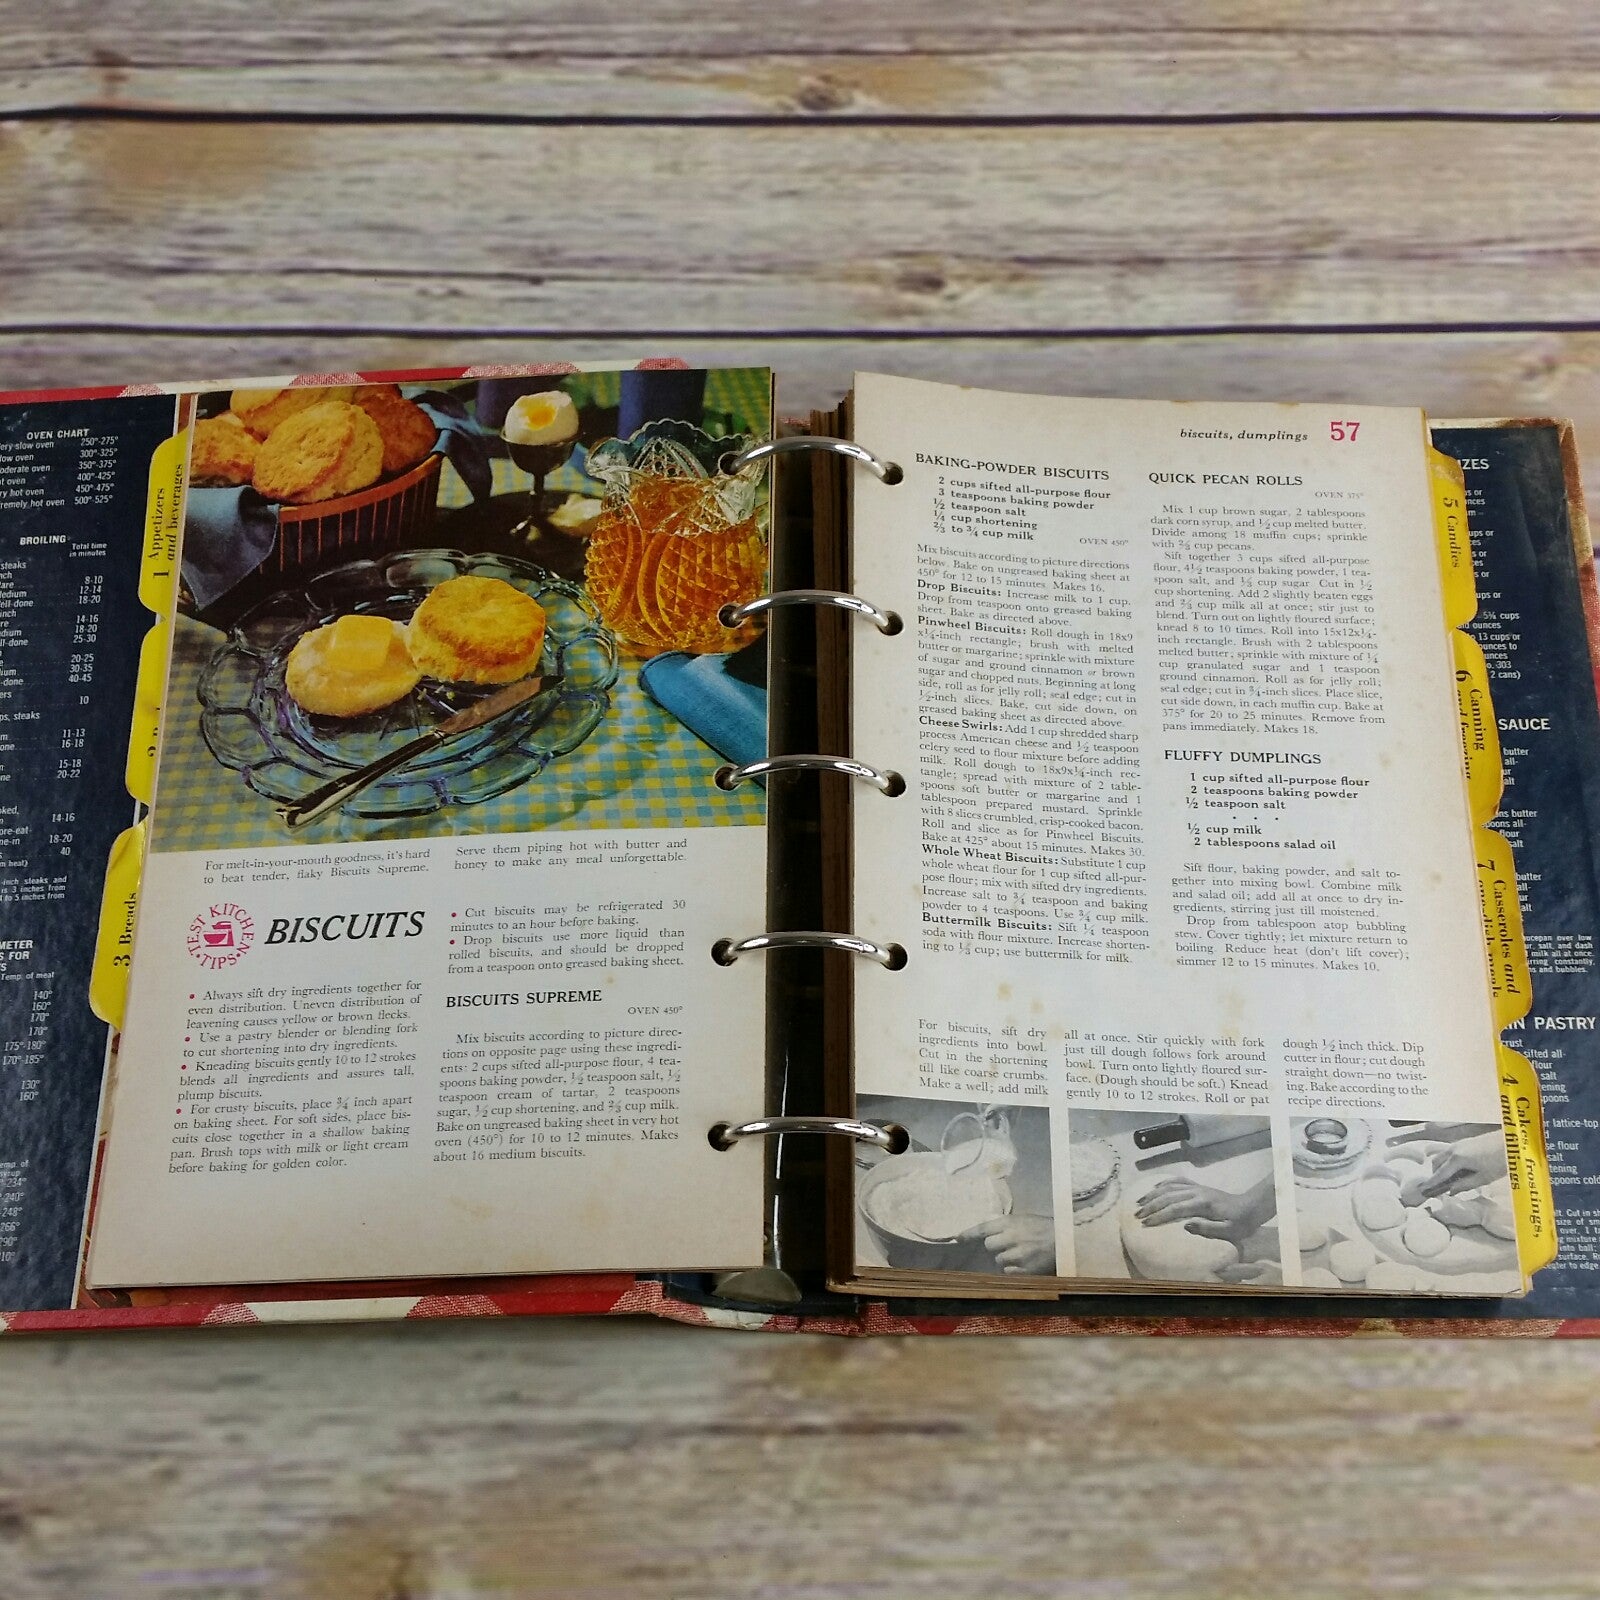 Vintage Better Homes and Gardens New Cookbook Recipes 5 Ring Binder Hardcover 1970s - At Grandma's Table